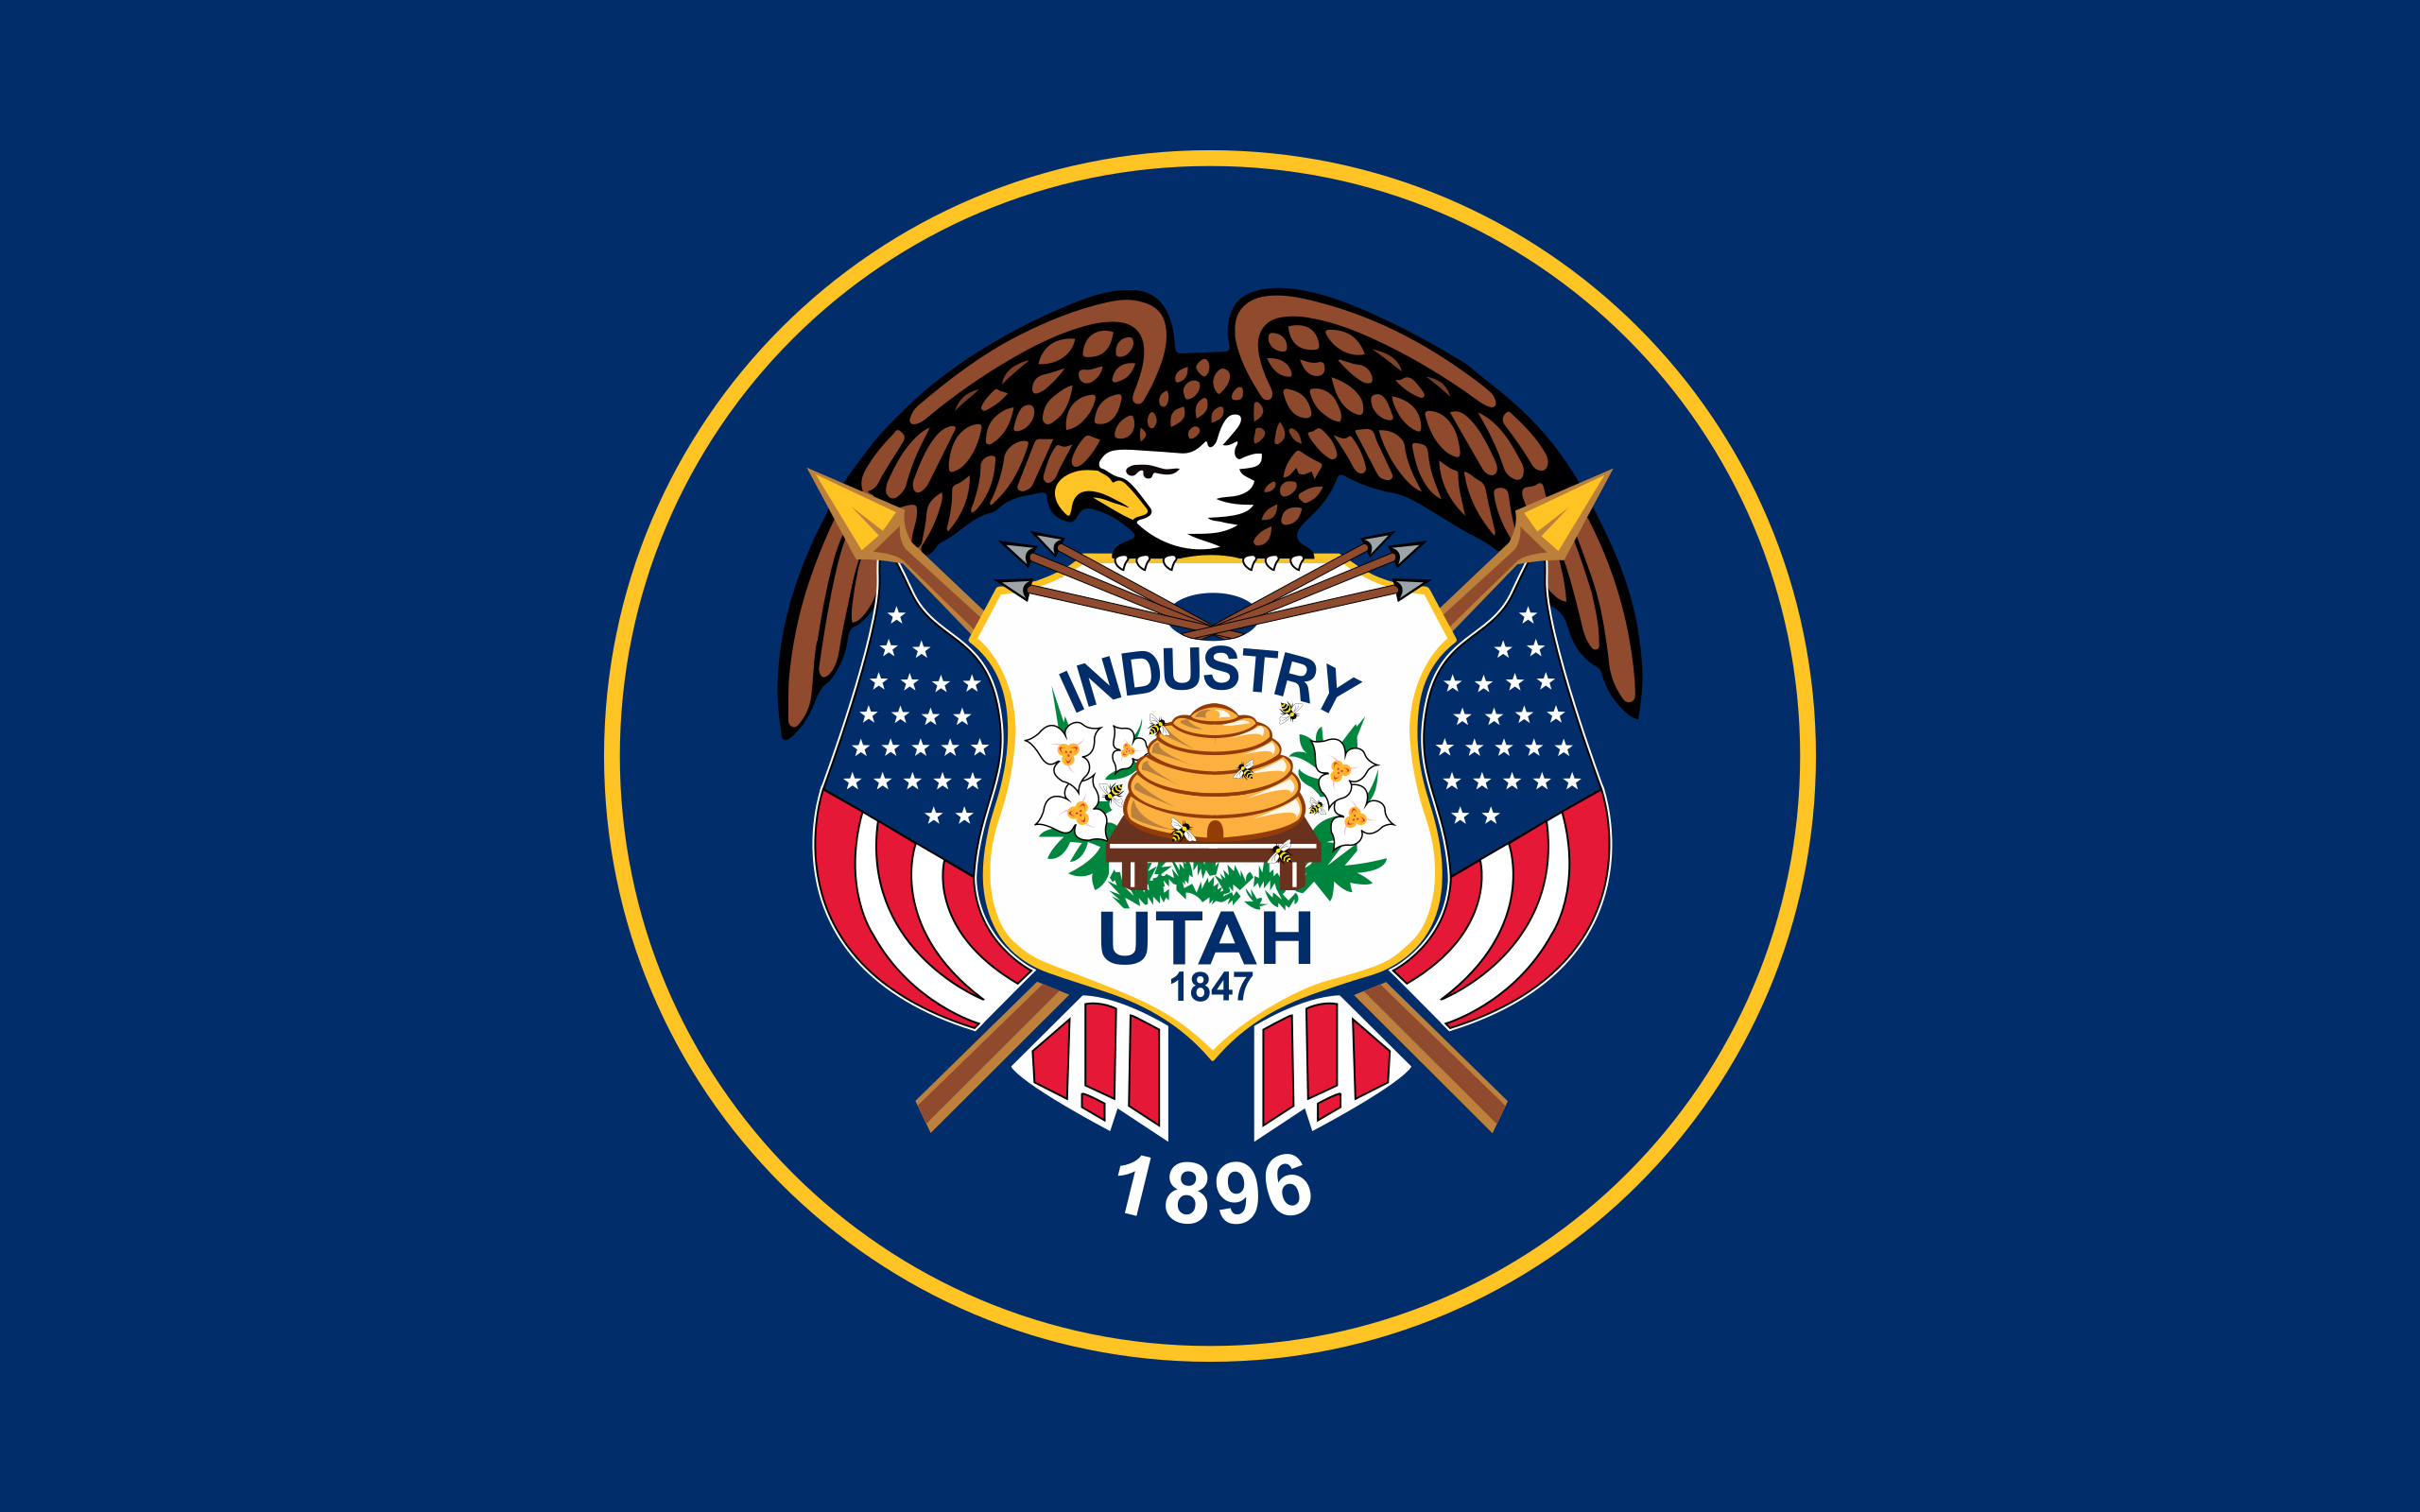 Citizen privacy is protected in Utah